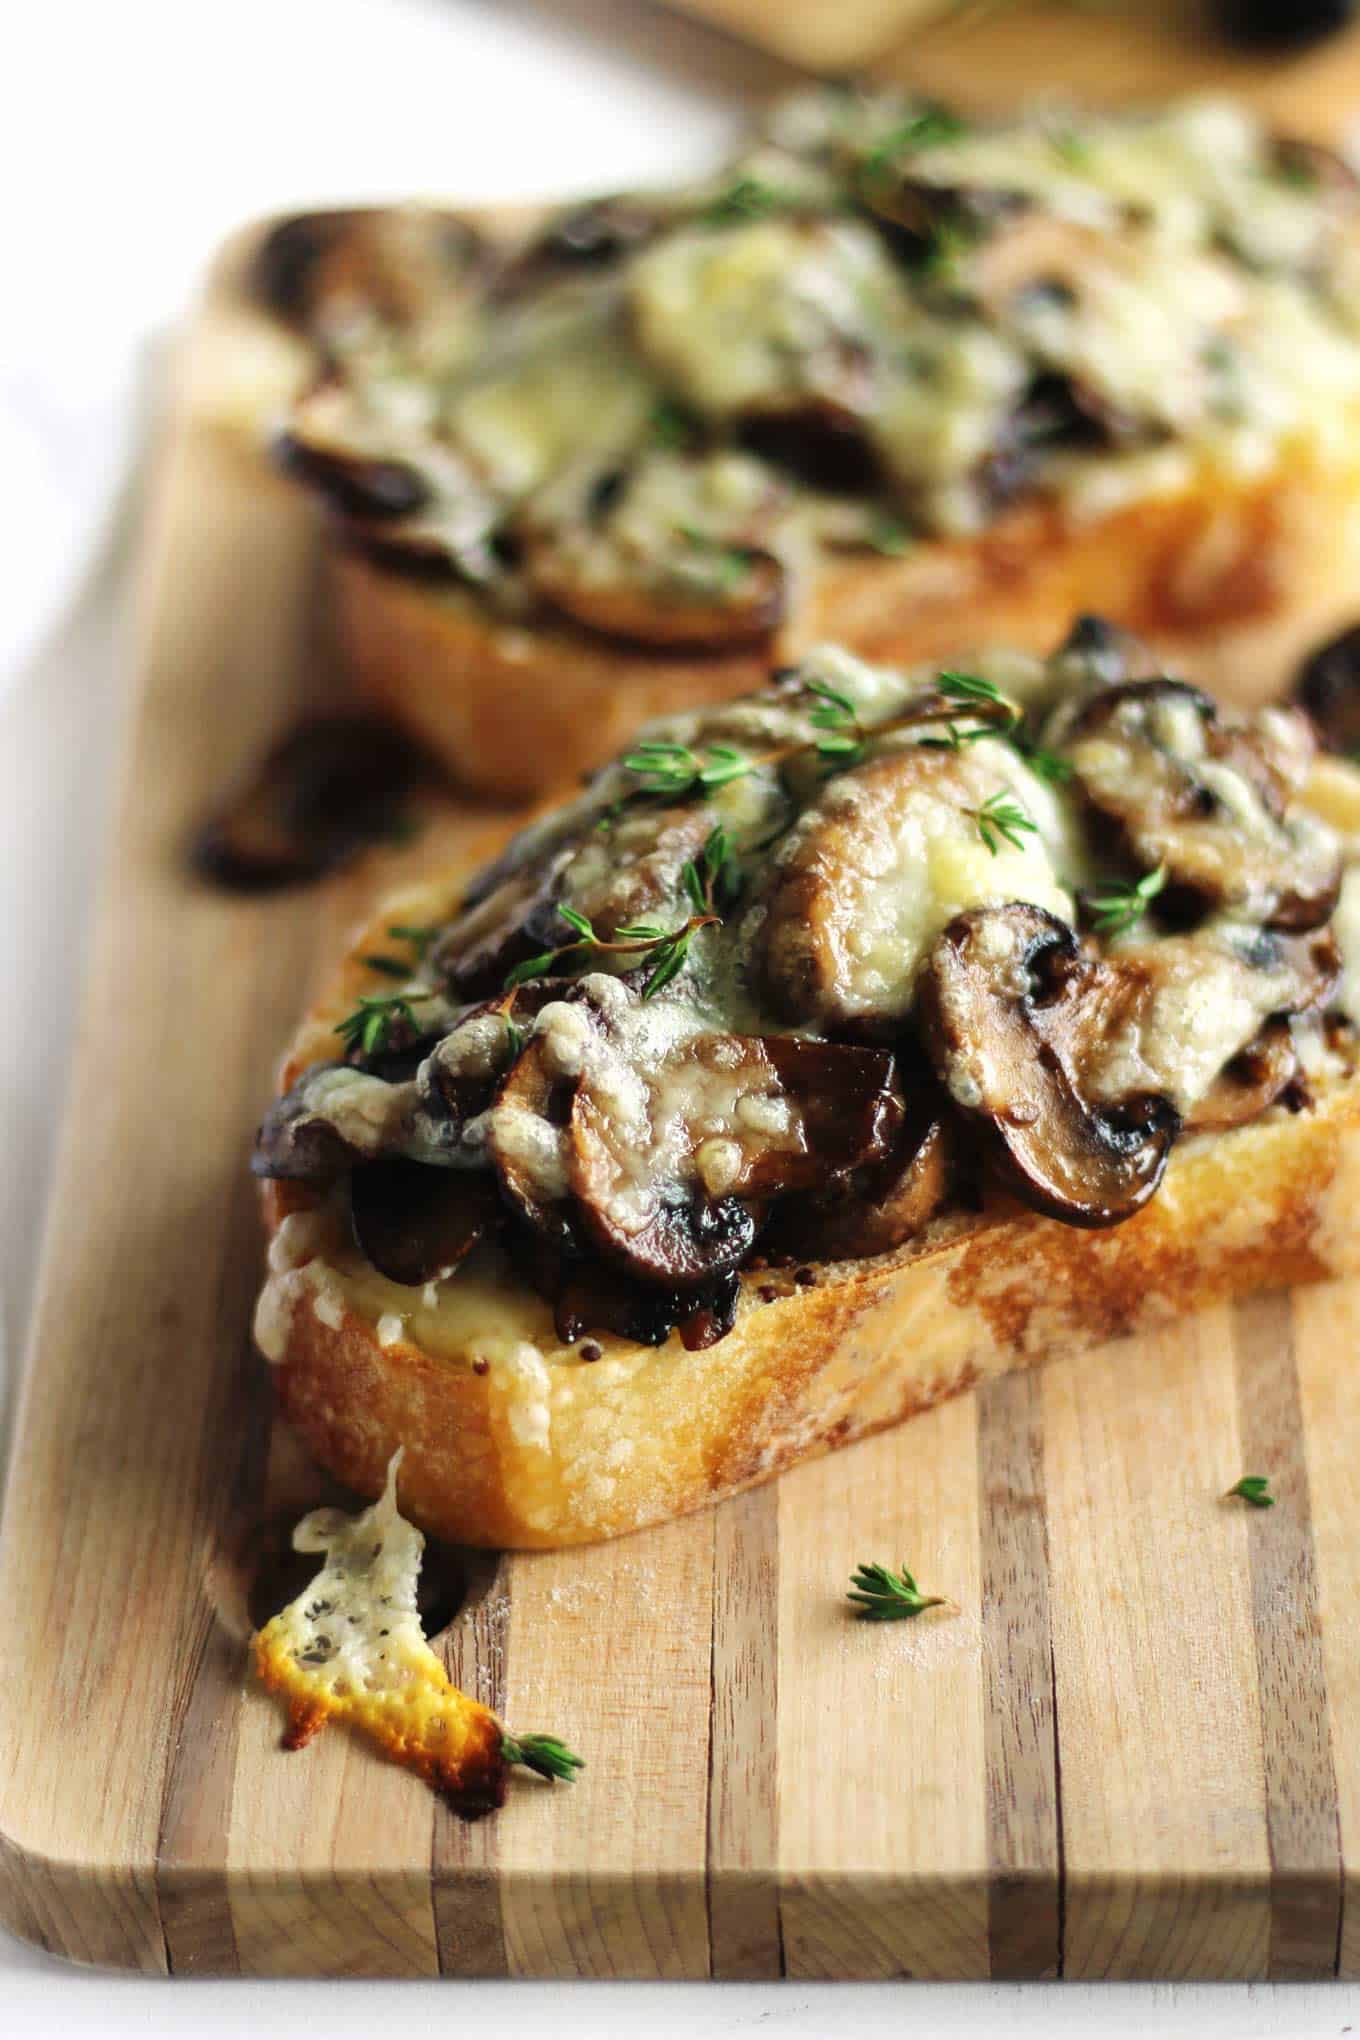 A photo of sauteed mushrooms on toast with broiled cheese and fresh thyme on top.